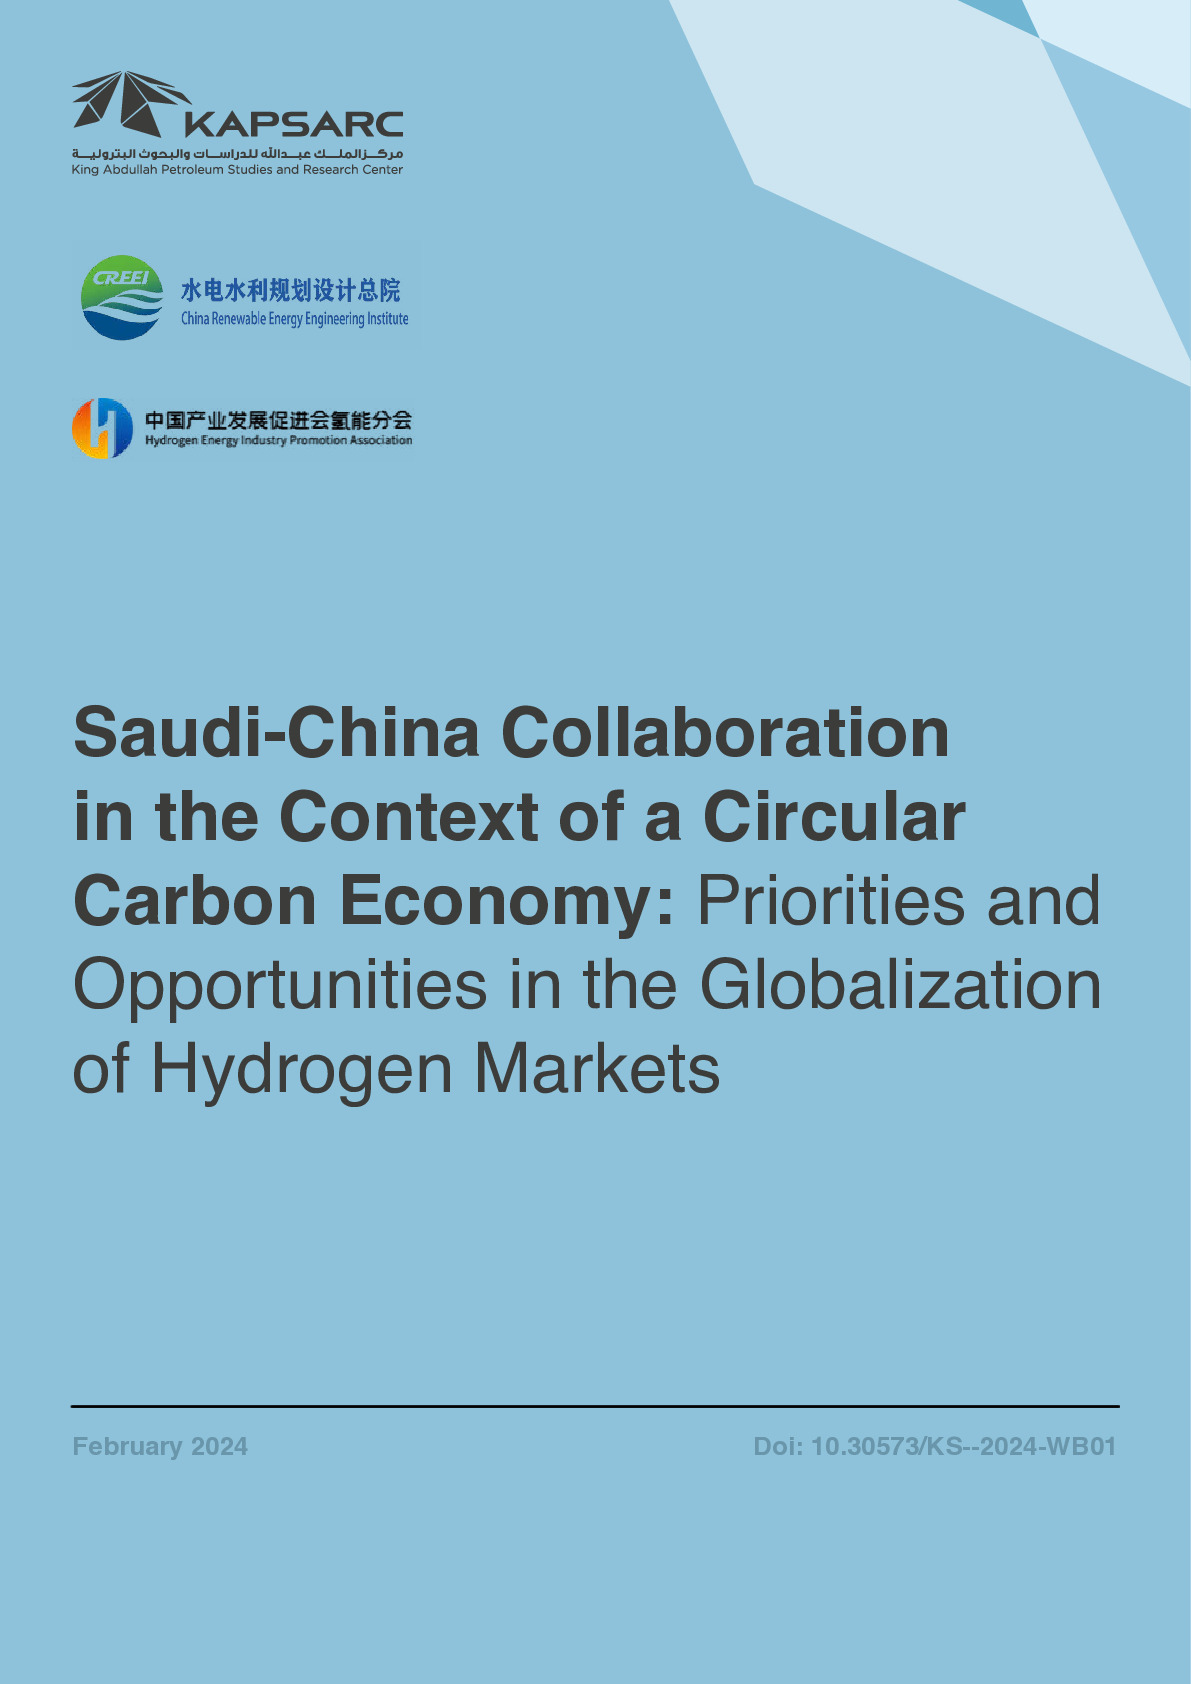 Saudi-China Collaboration in the Context of a Circular Carbon Economy: Priorities and Opportunities in the Globalization of Hydrogen Markets